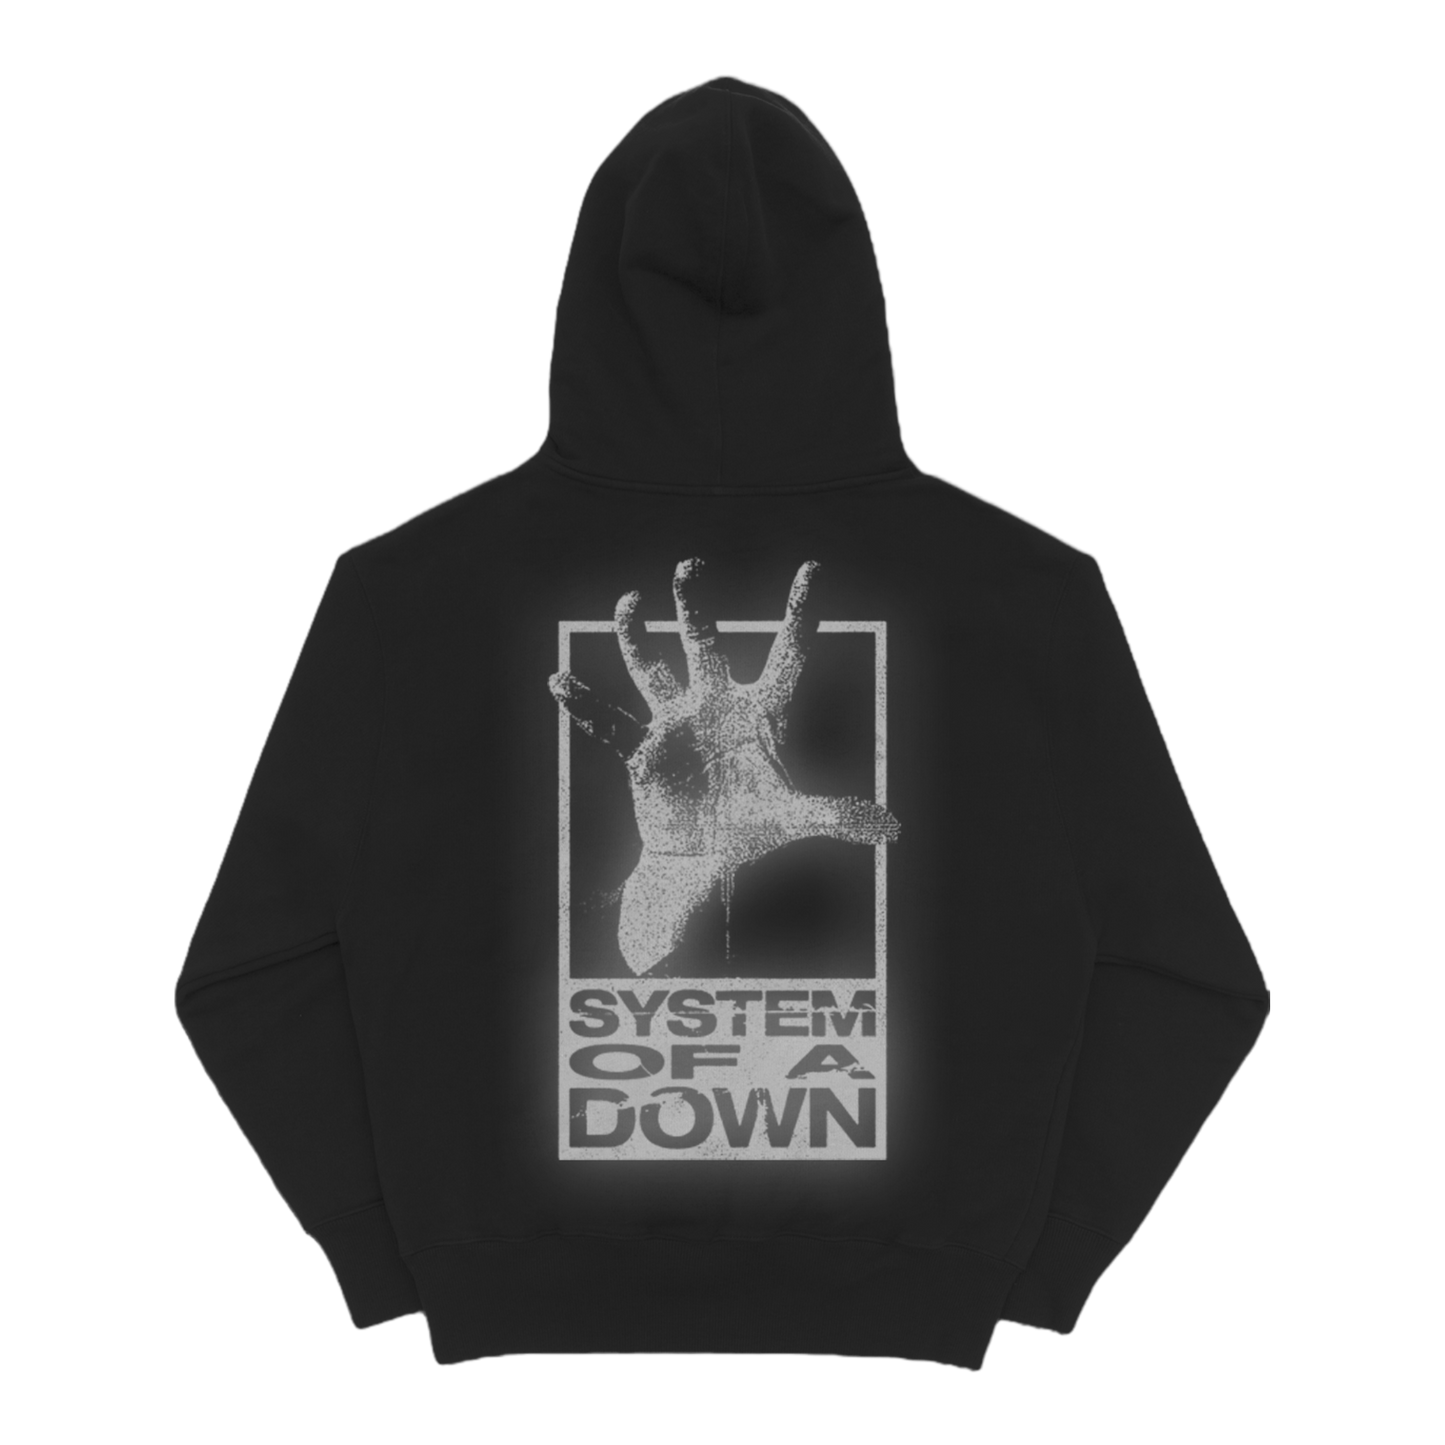 Self-Titled Outside The Box Reflective Hoodie